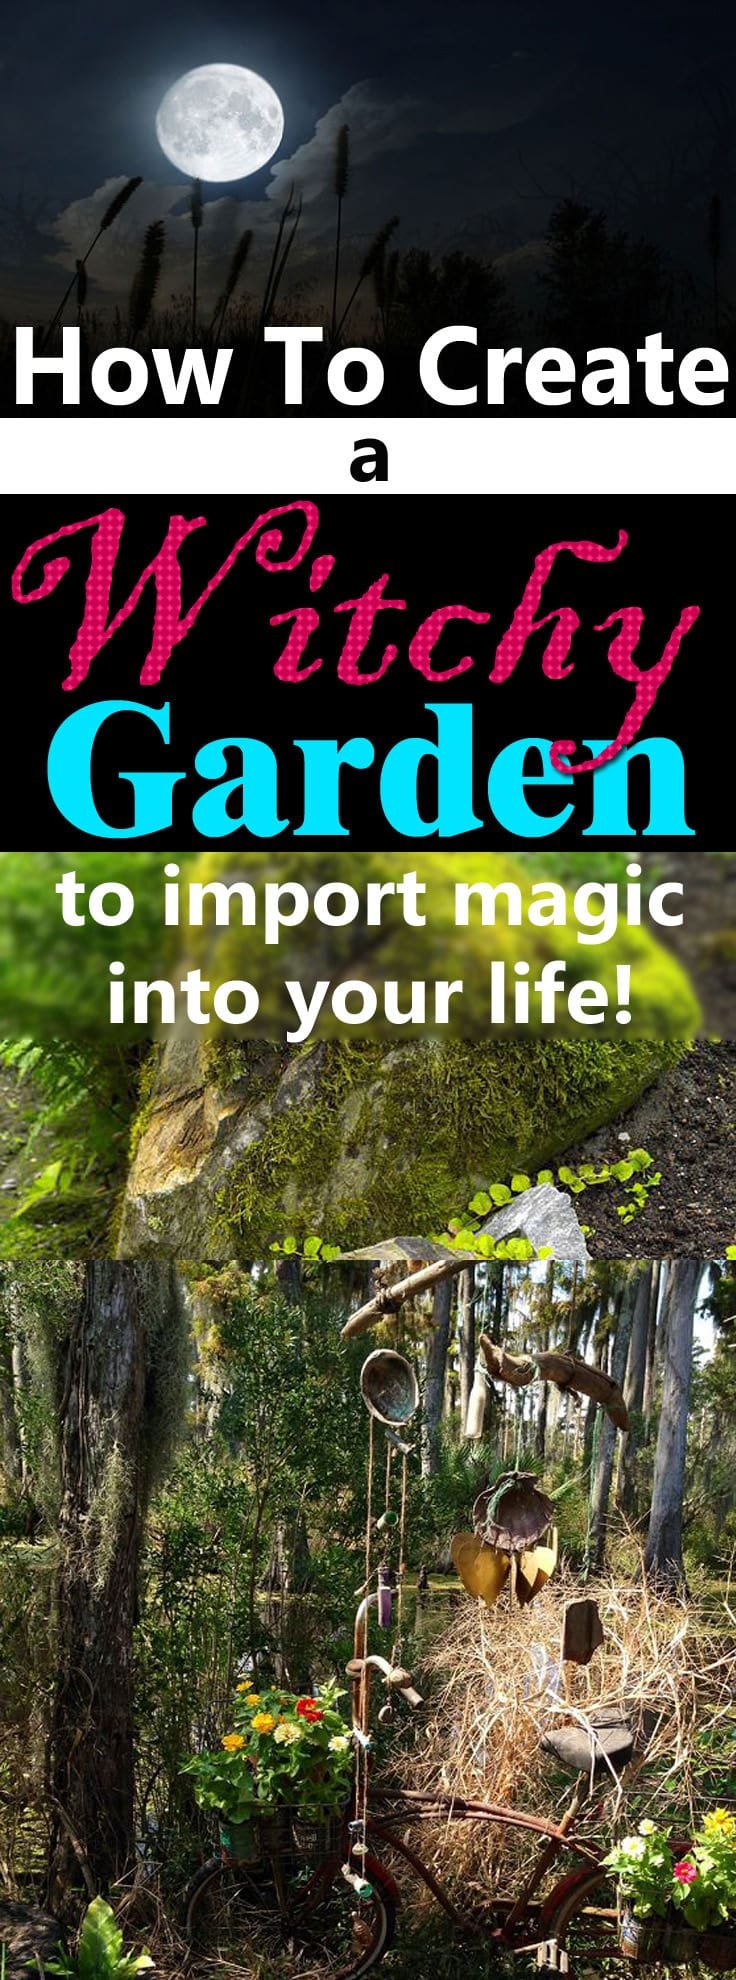 If you believe in magic, support mystical theories and consider yourself a spiritual person--Learn how to create a Witch's Garden!